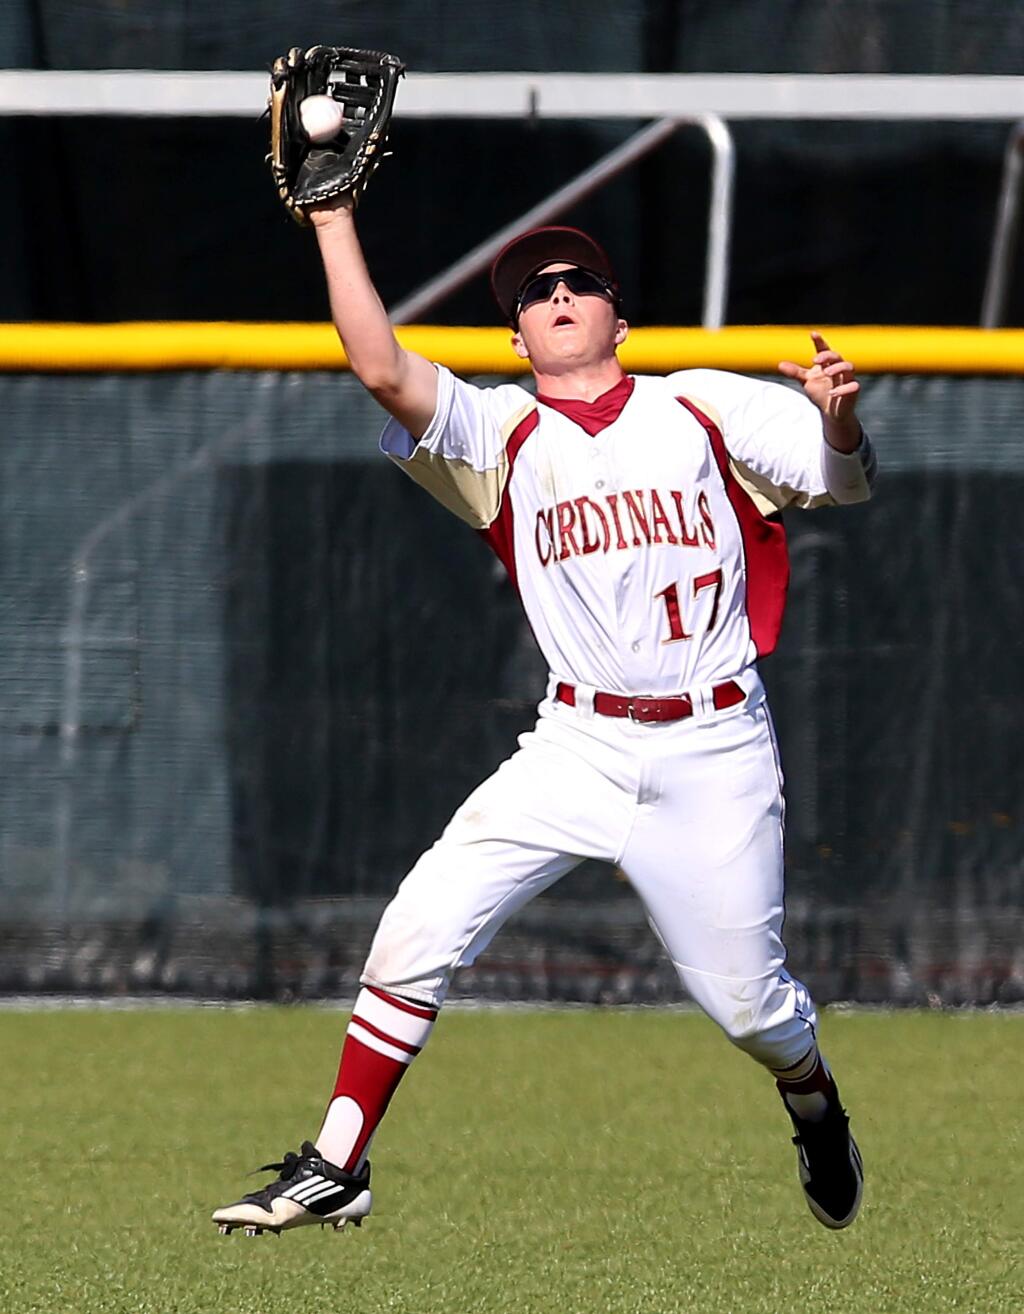 Cardinal Newman's Alex Roeser catches a fly ball during the game against Ukiah, held at Cardinal Newman High School, Friday, April 10, 2015. (CRISTA JEREMIASON / The Press Democrat)